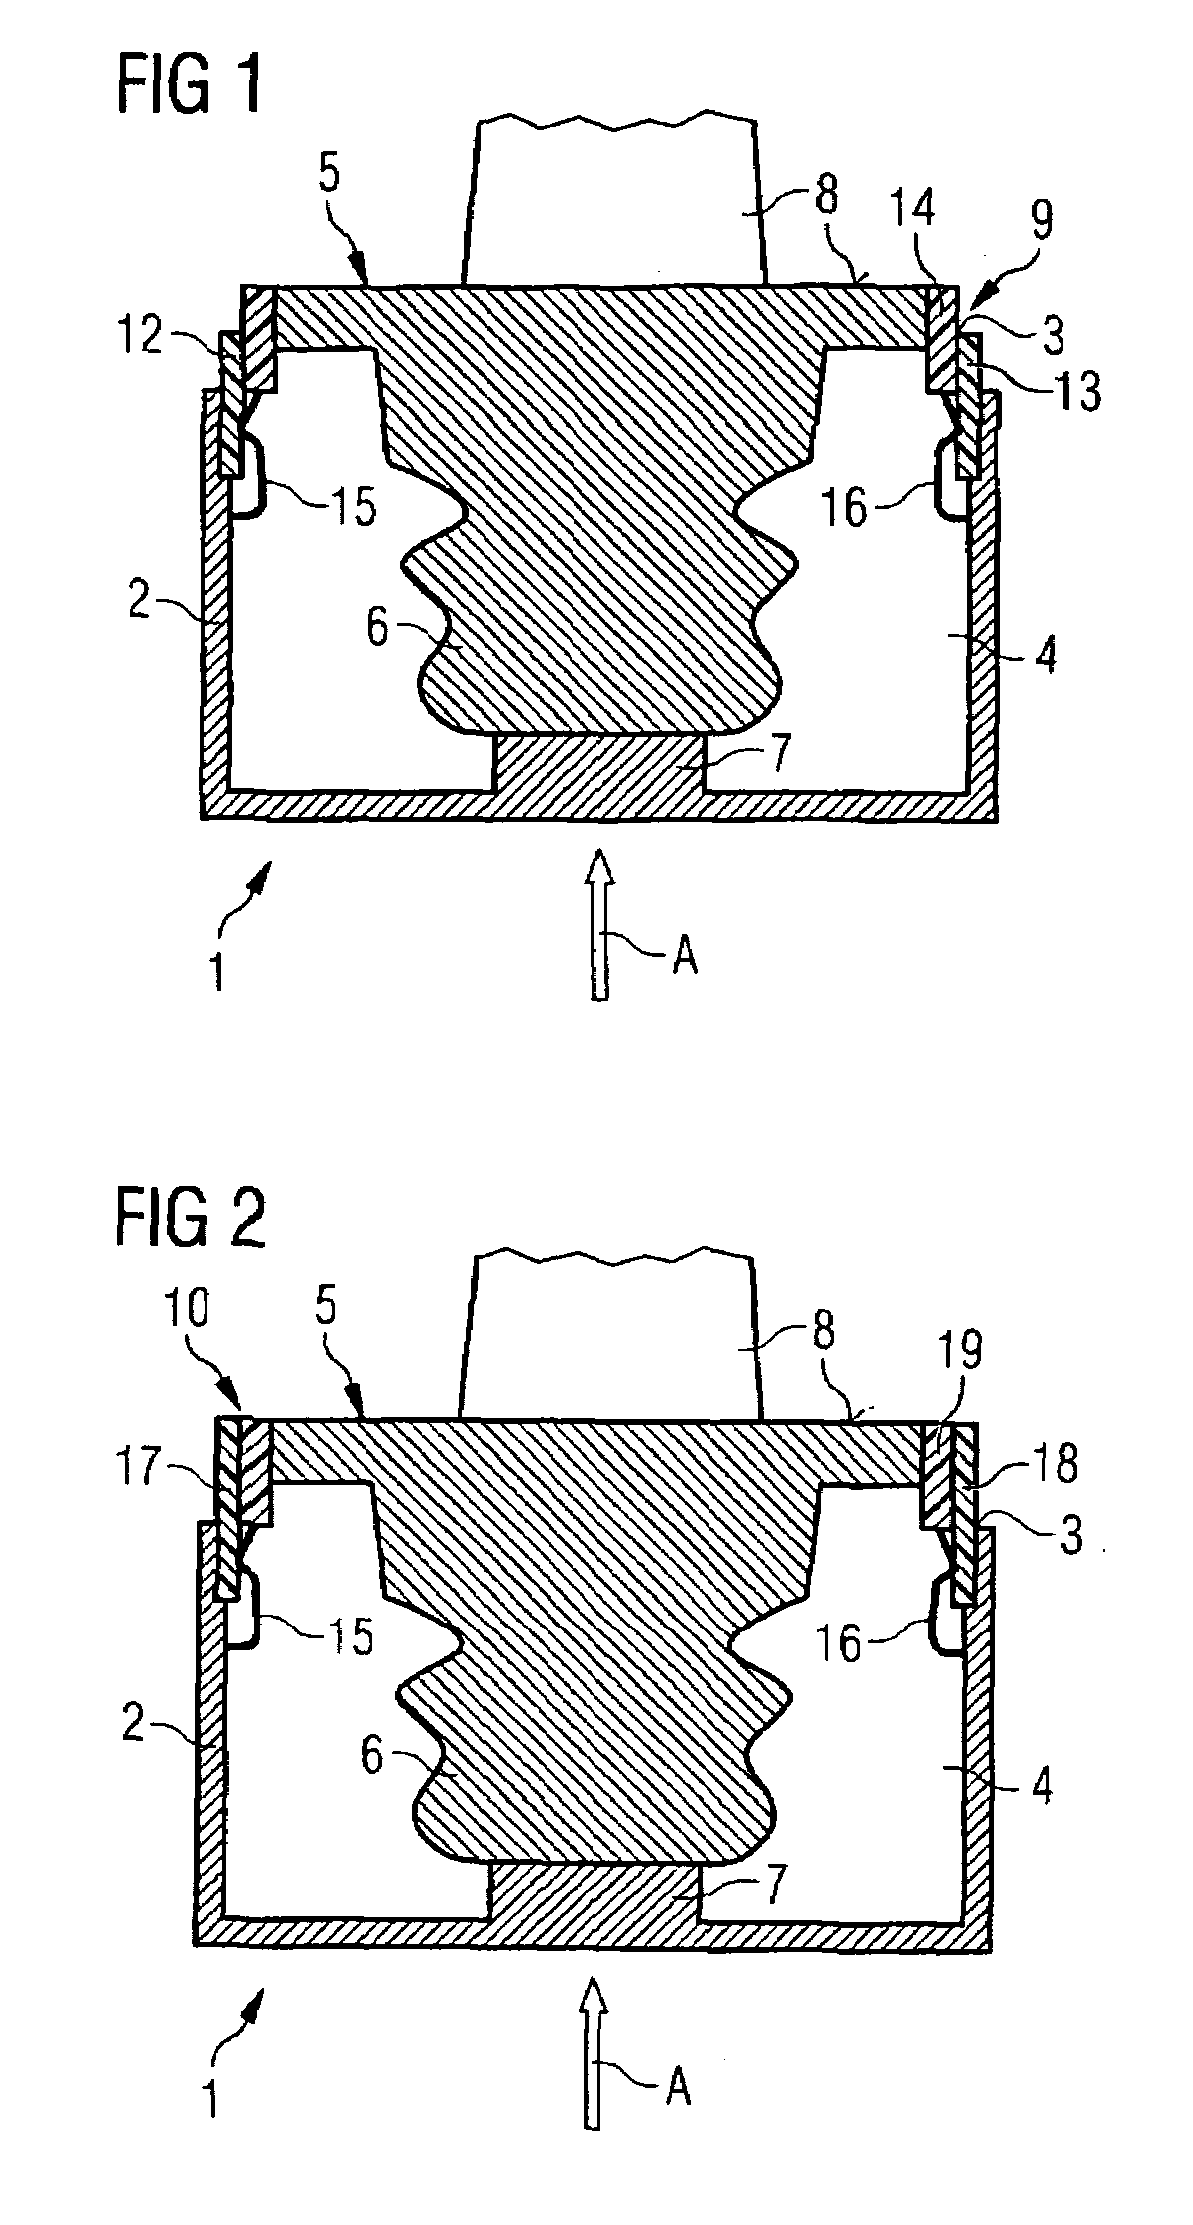 Method of preparing turbine blades for spray coating and mounting for fixing such a turbine blade